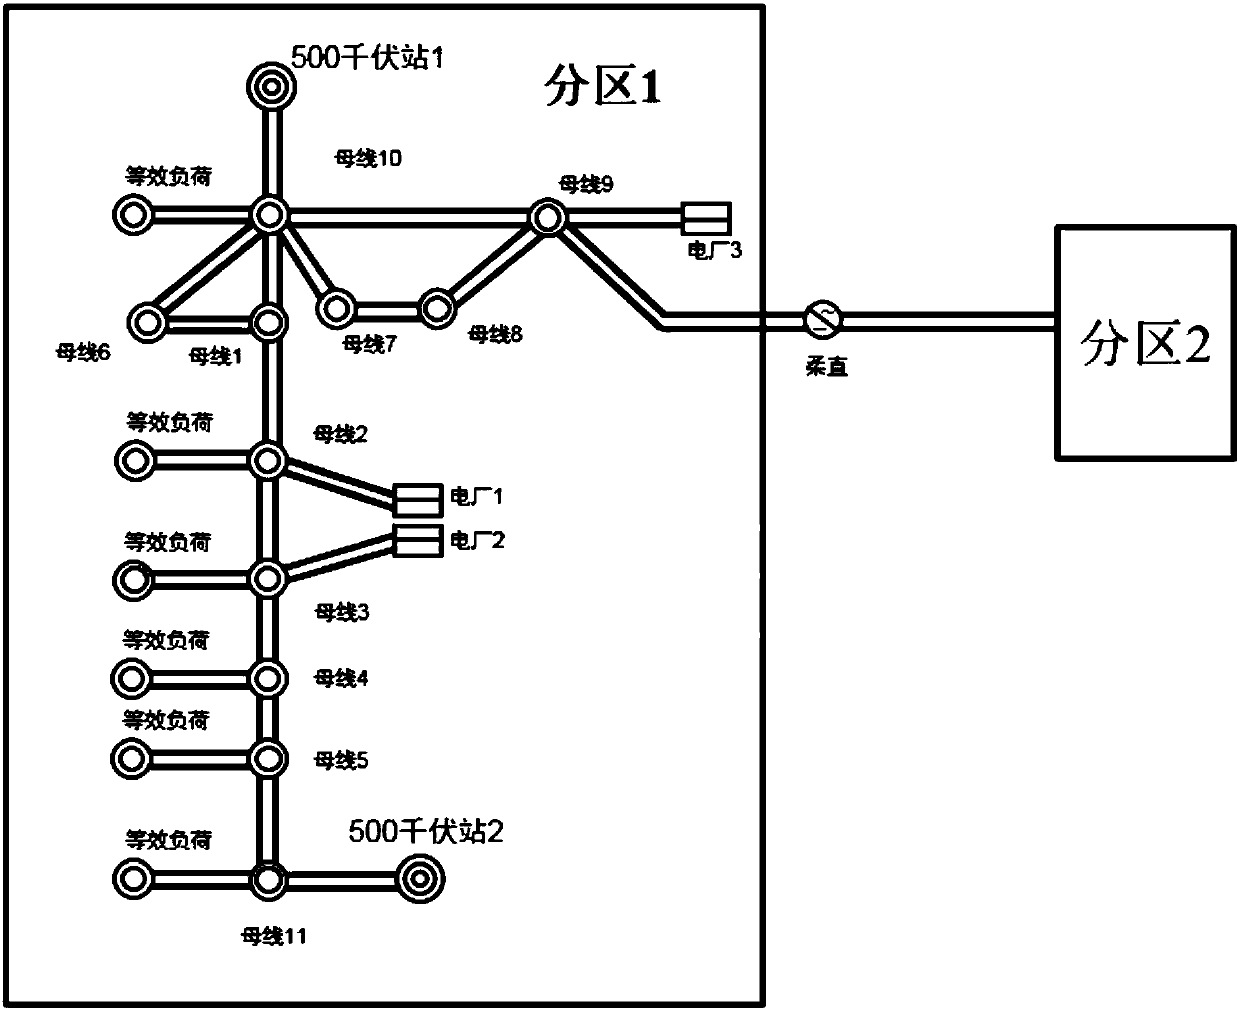 Partition interconnection operation scheduling method of urban power grid based on flexible direct-current power transmission technique